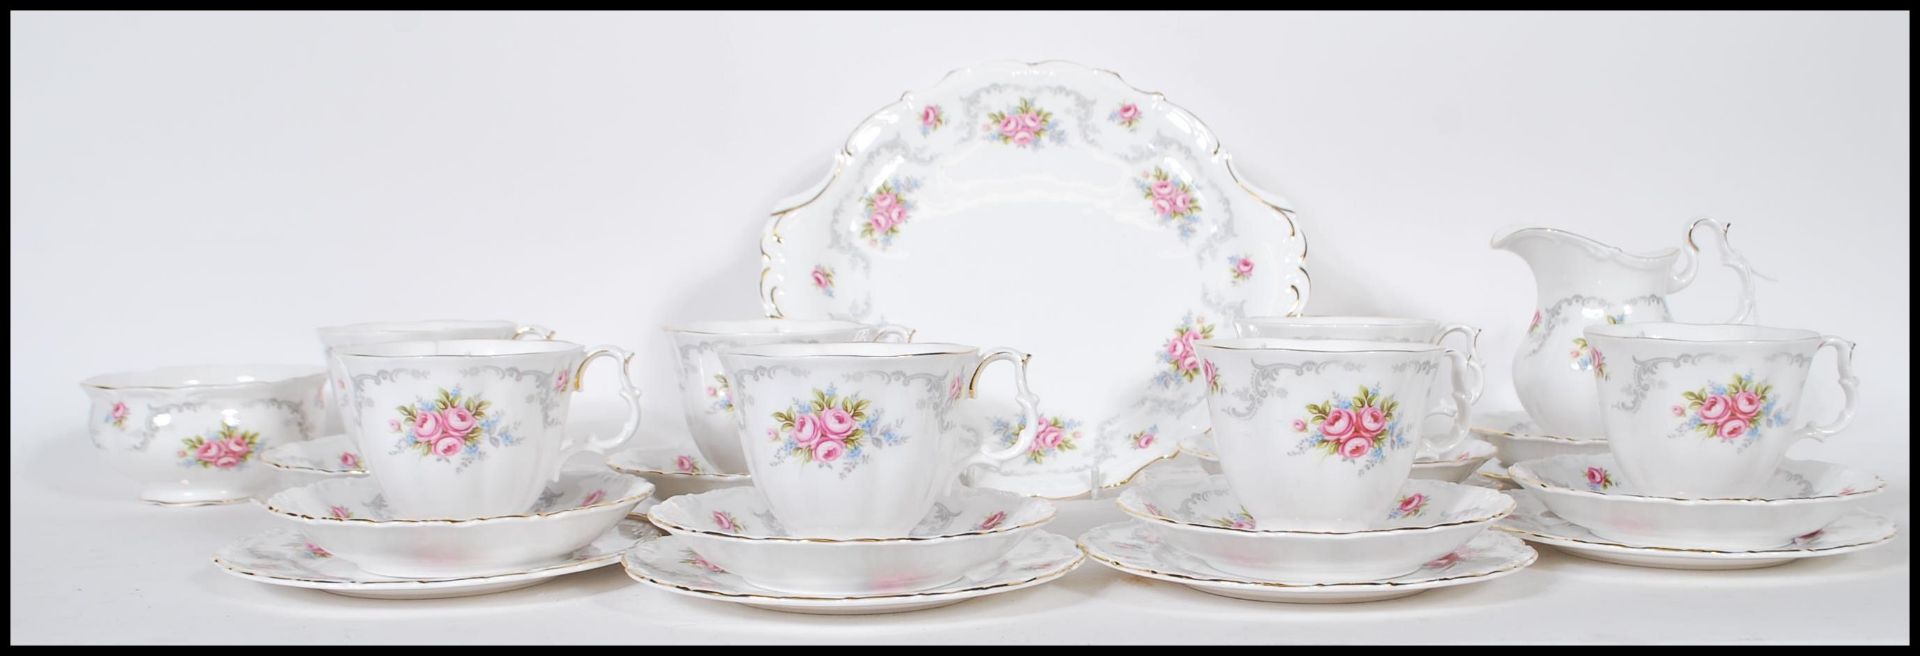 A Royal Albert tea service in the Tranquillity pattern having floral and gray foliate decoration